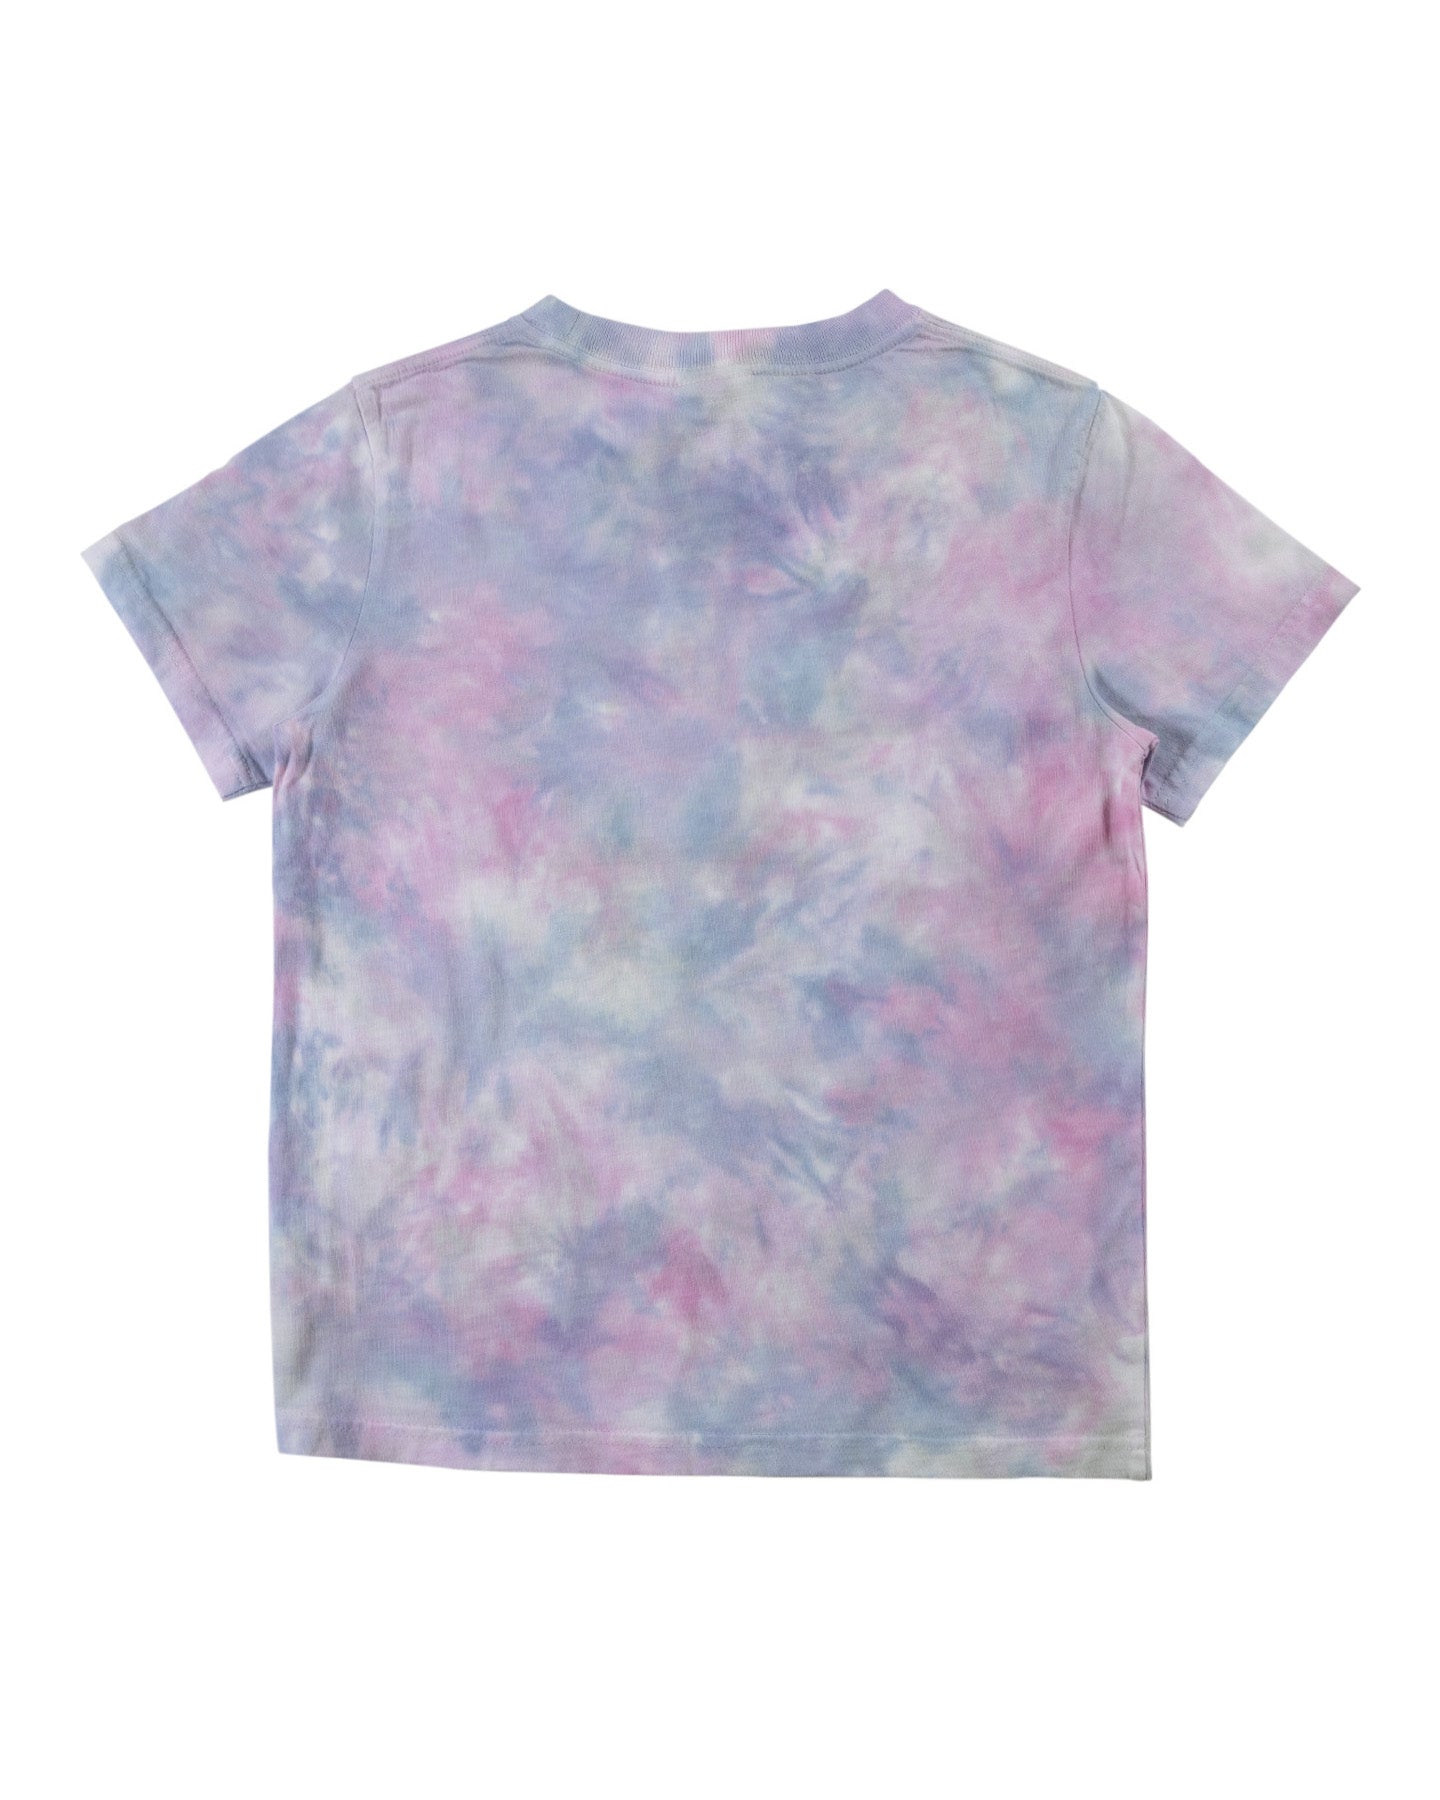 Other Dot Front Tie Dye Tee - Multi